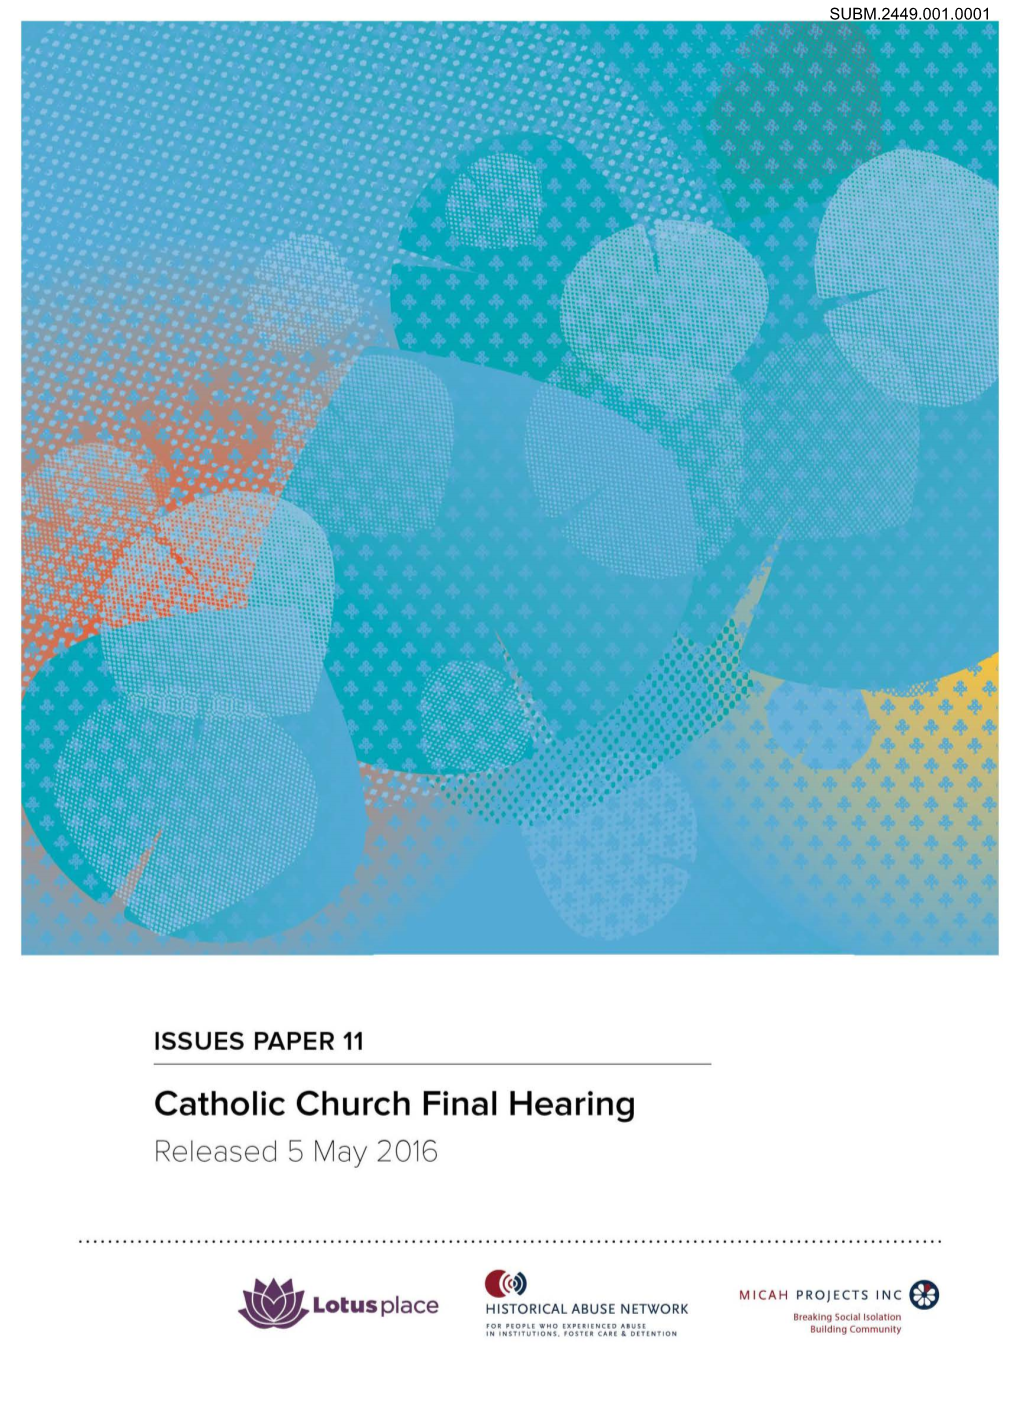 Catholic Church Final Hearing Re Leased 5 May 2016